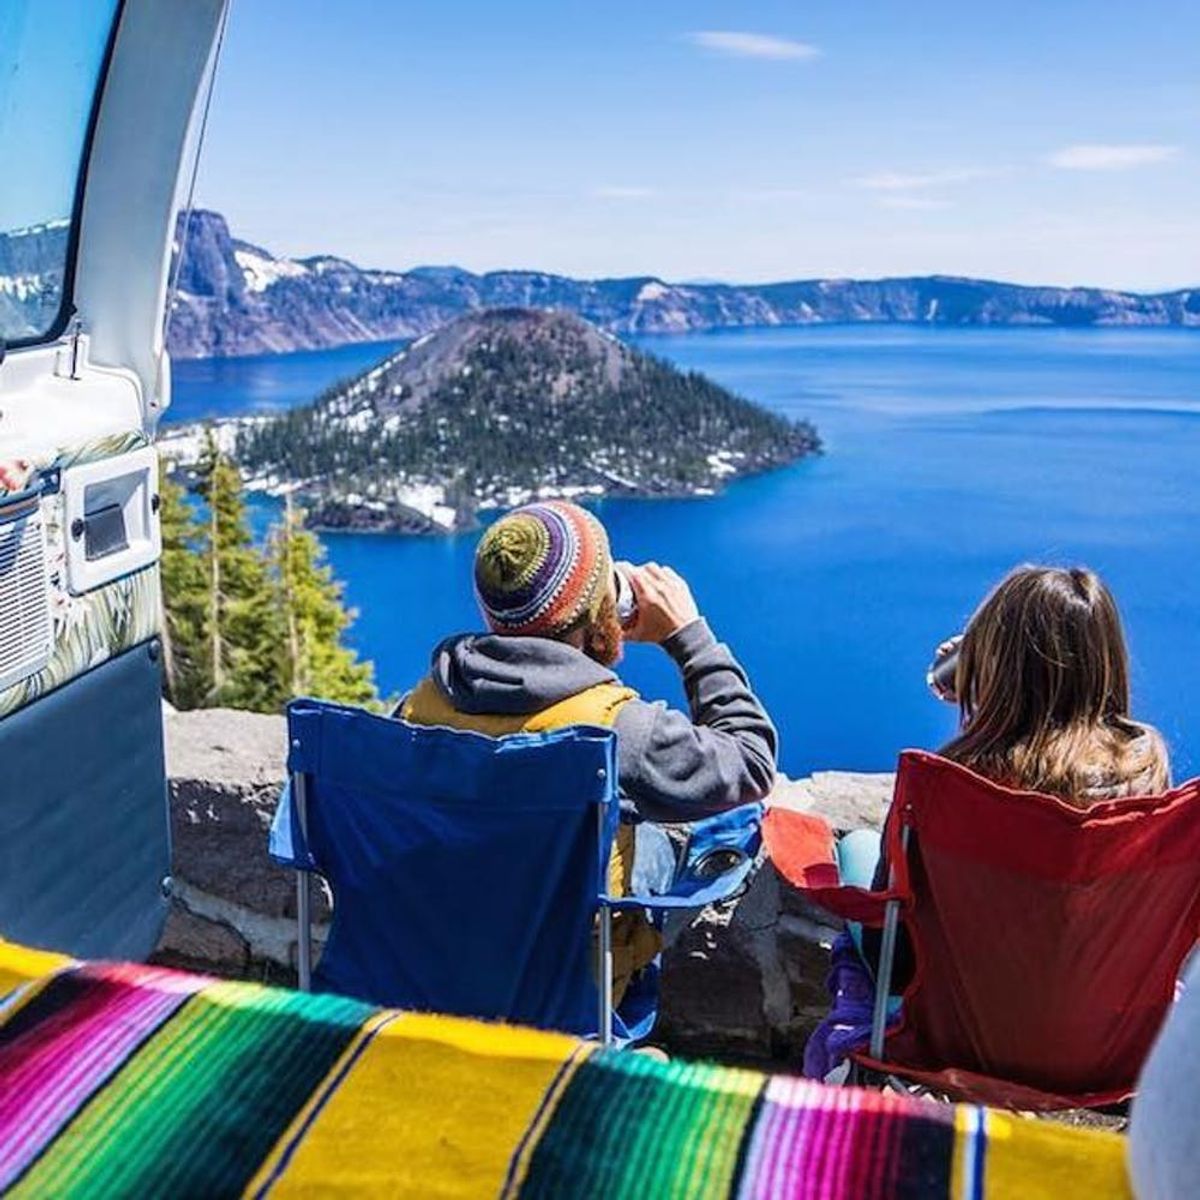 24 Instagrams That Prove #VanLife Is the Best Life